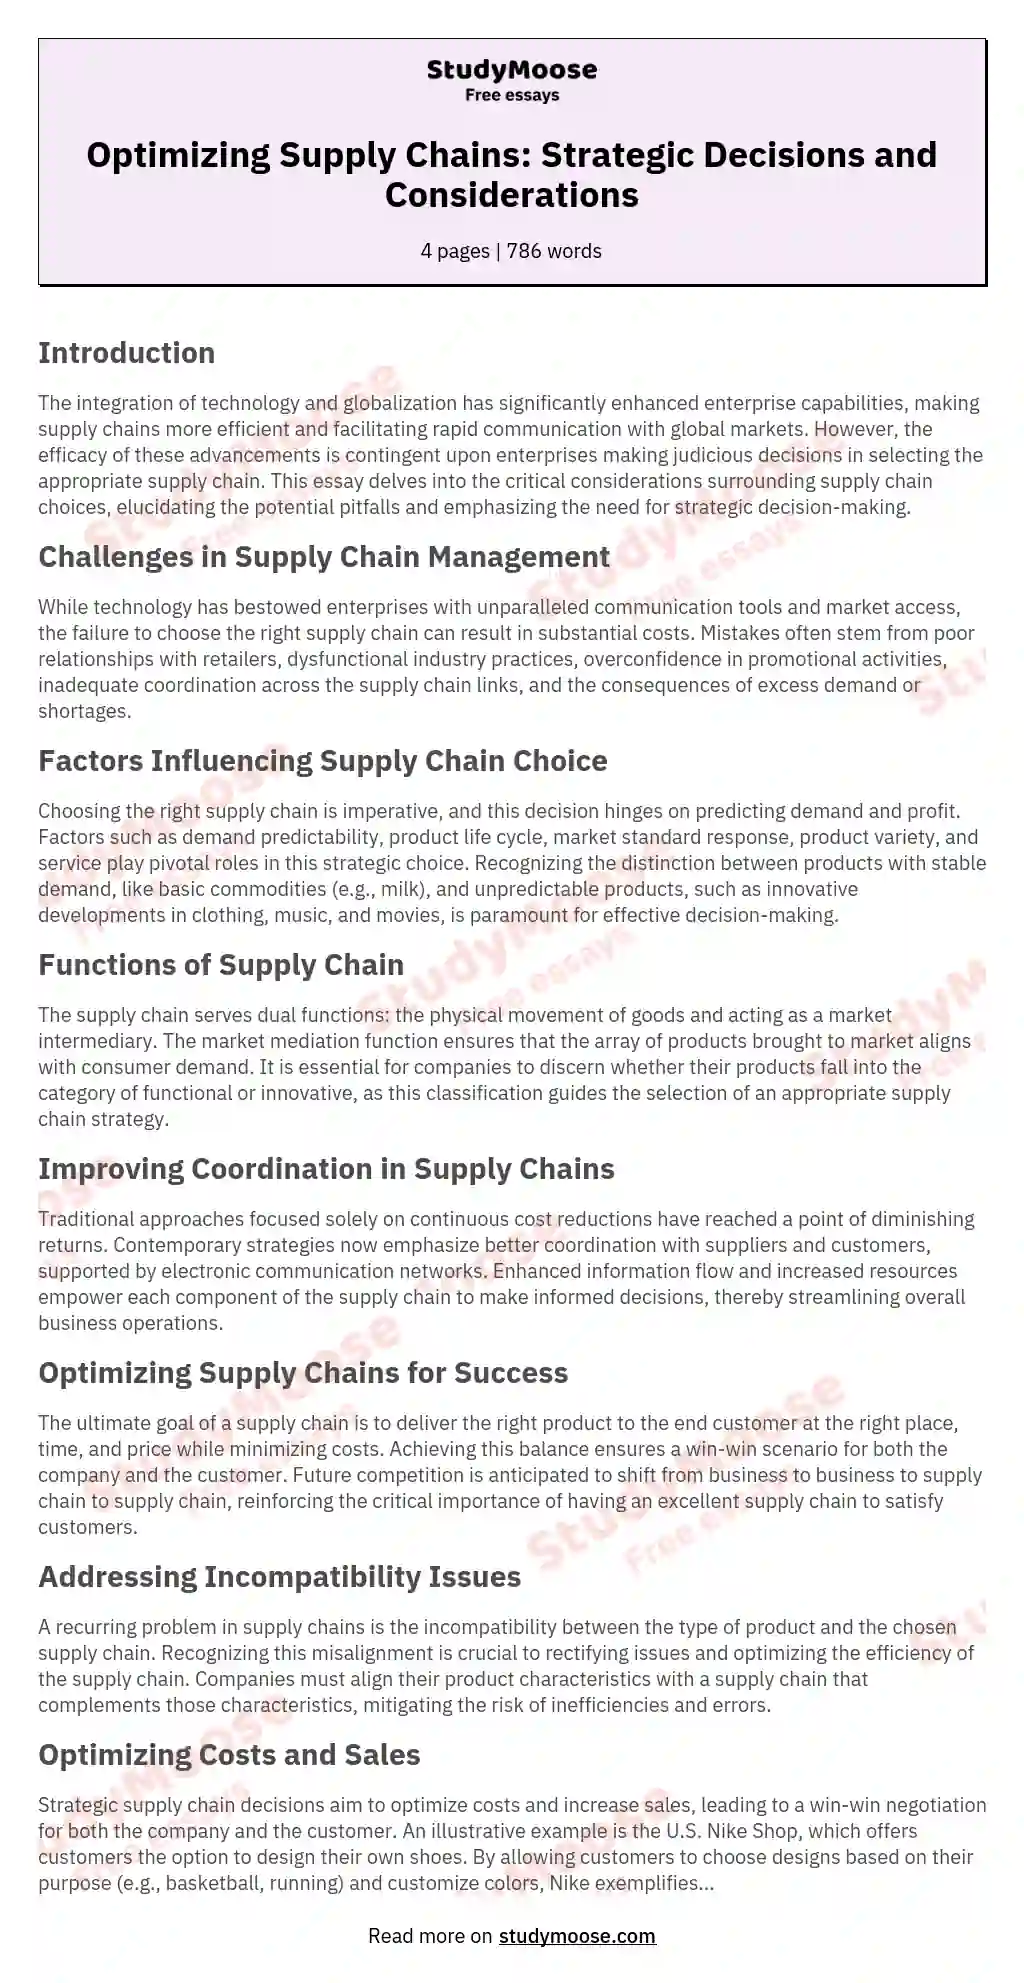 Optimizing Supply Chains: Strategic Decisions and Considerations essay